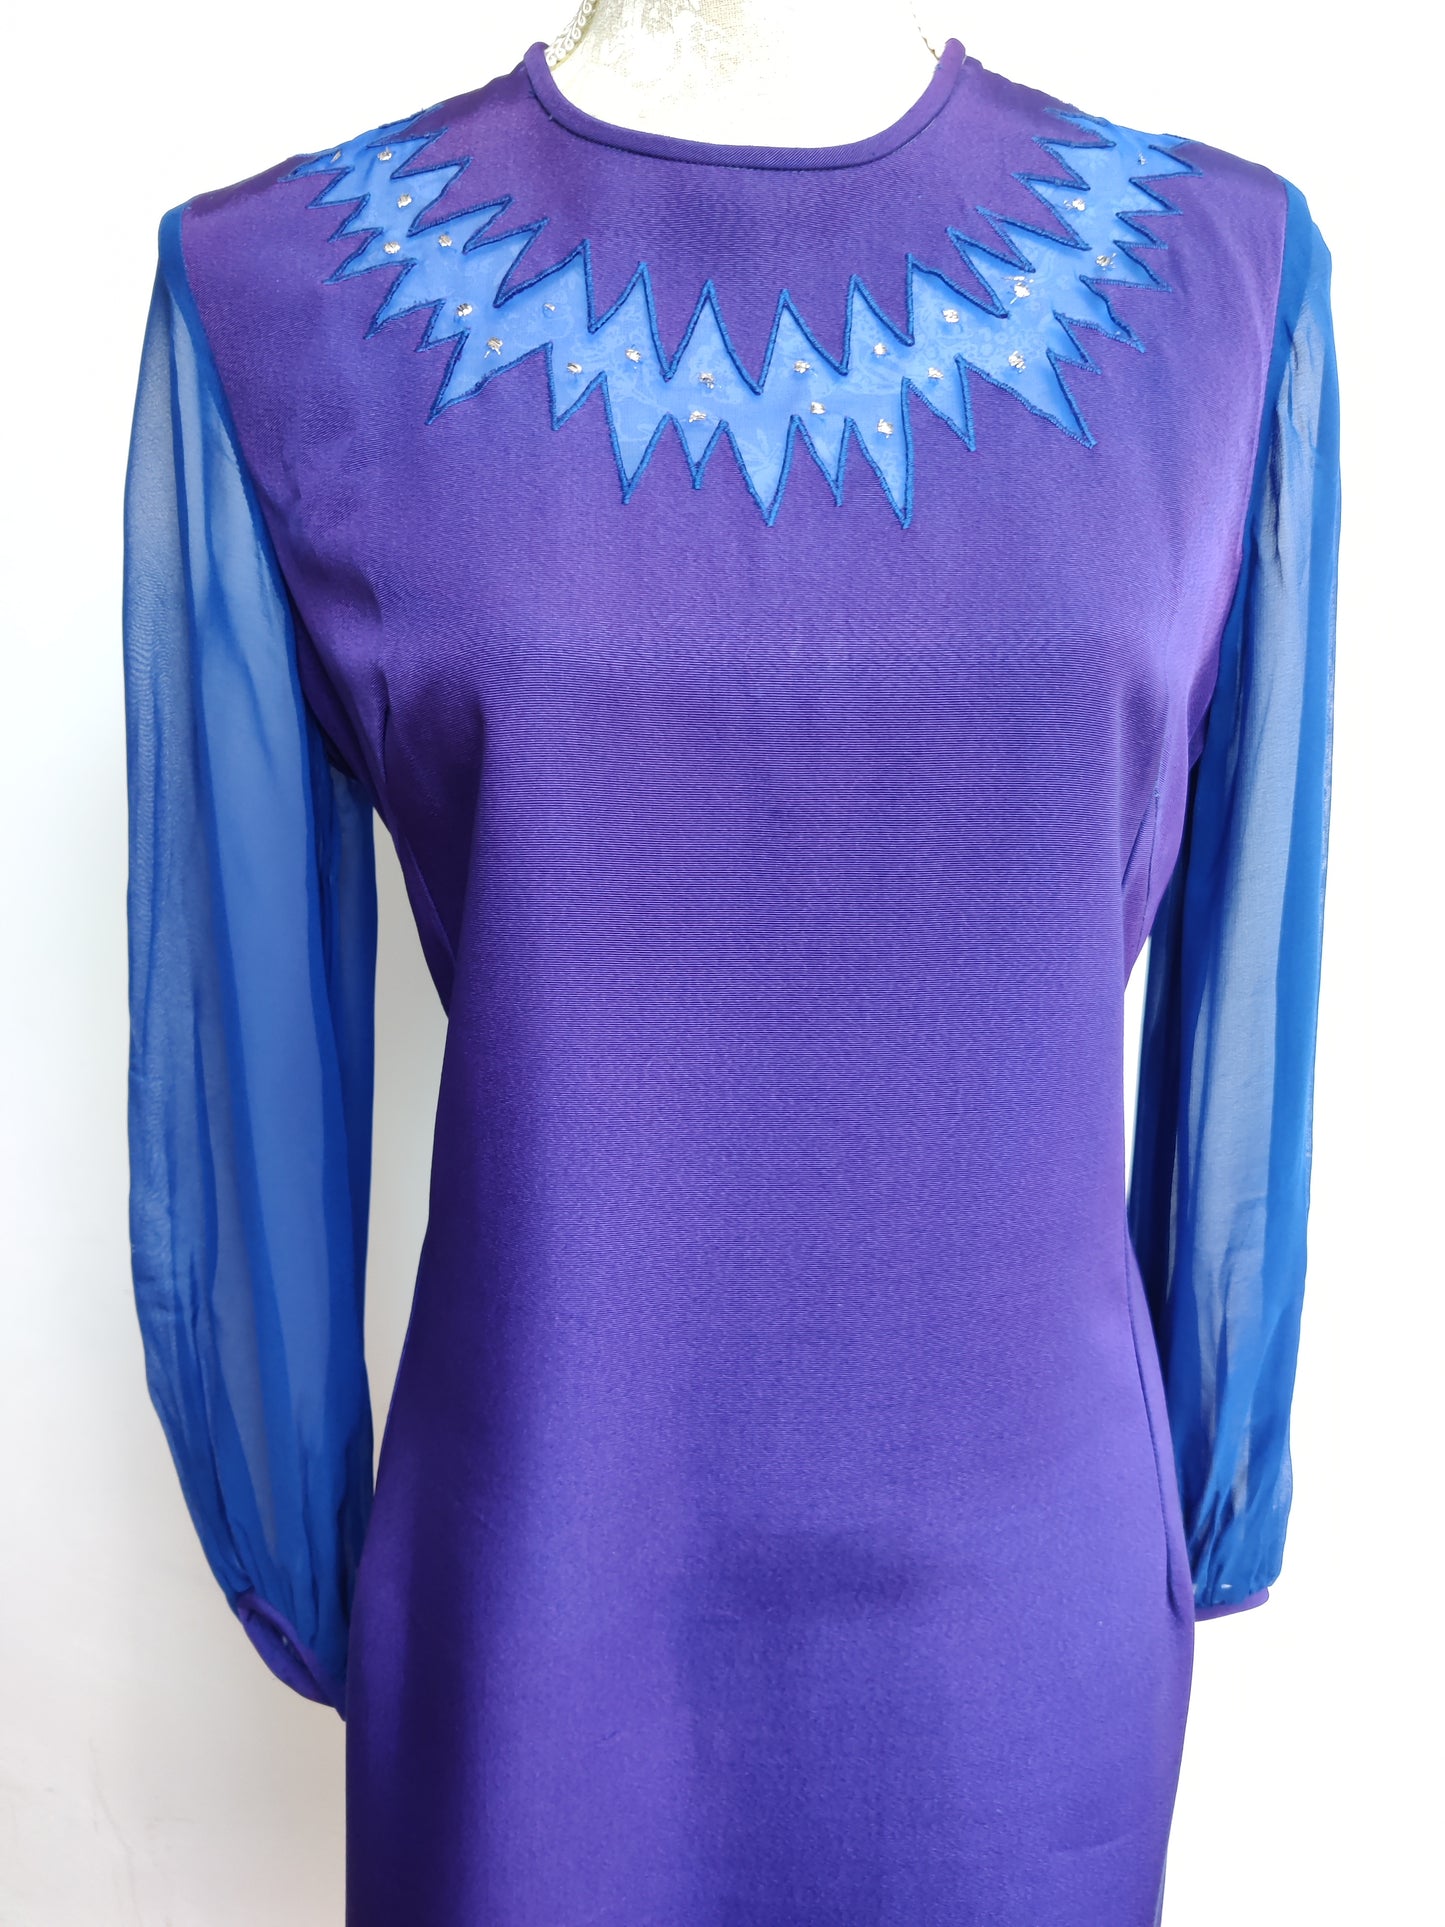 Incredible 60s dress with lightening bolt chiffon detail.